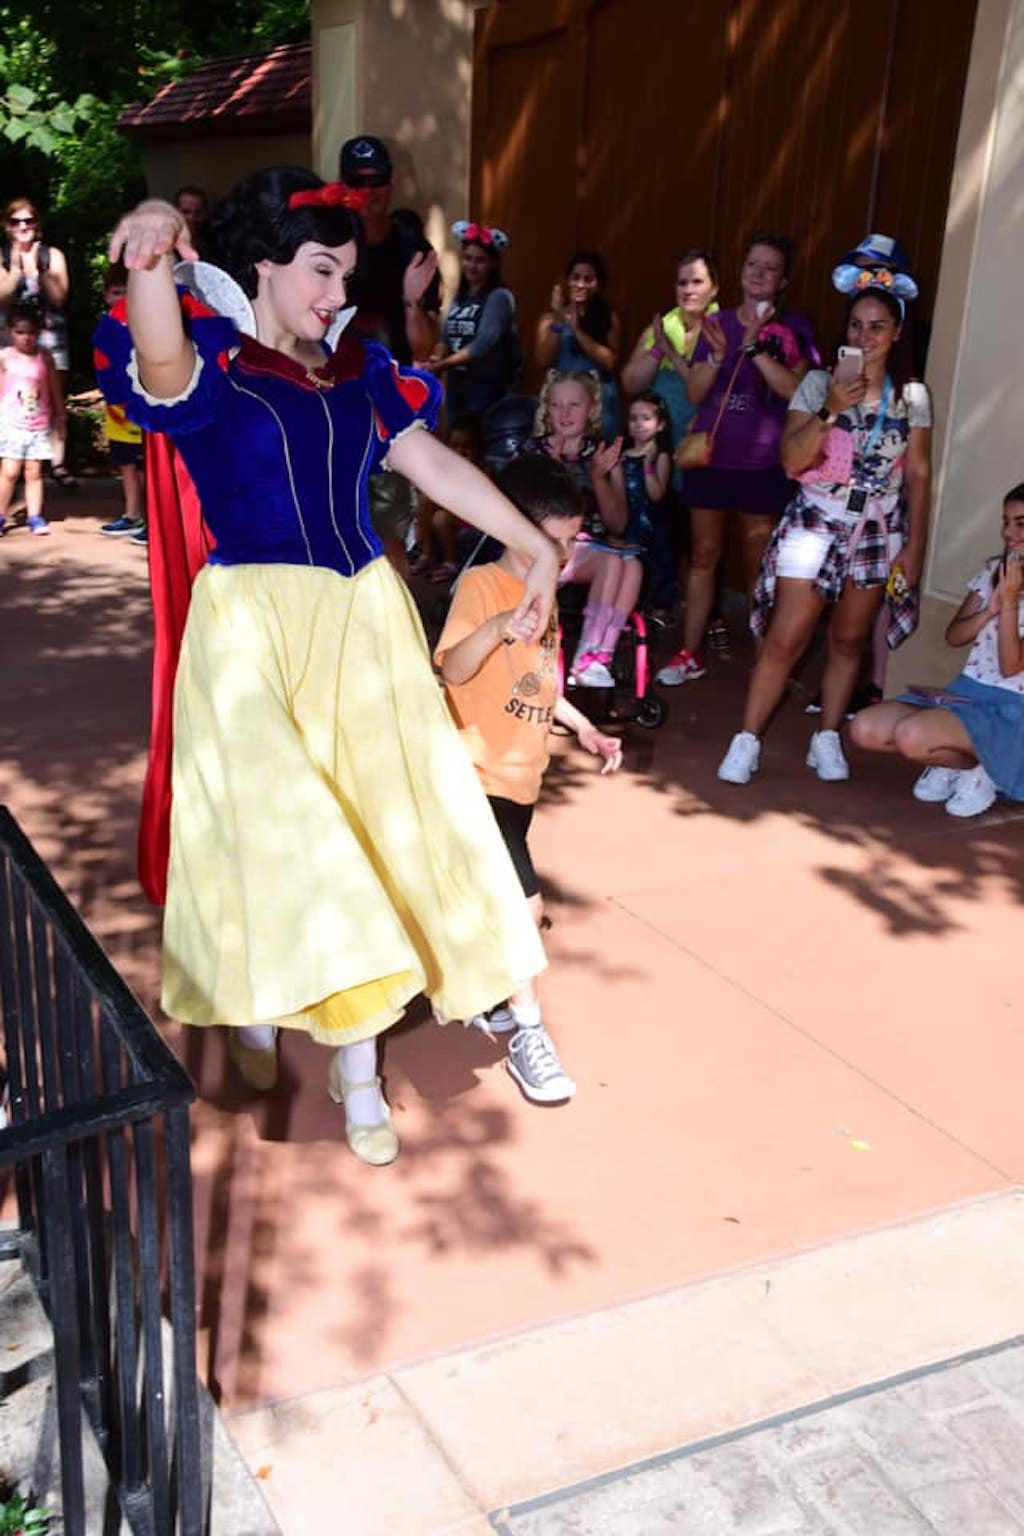 snow white comforts child with autism